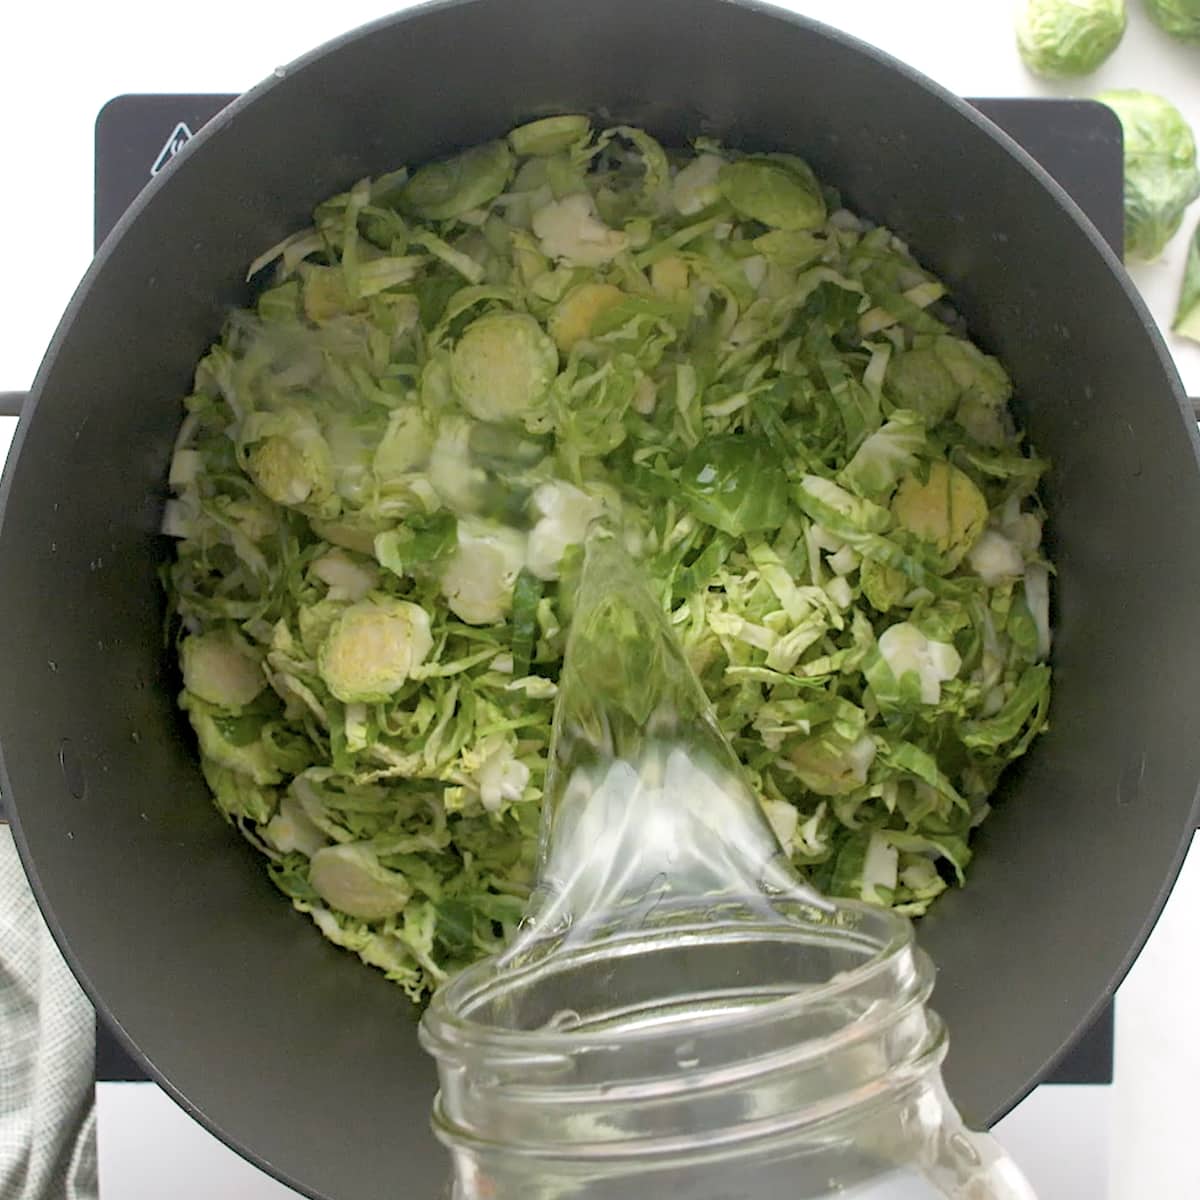 shredded brussels sprouts and cabbage in a pan with water